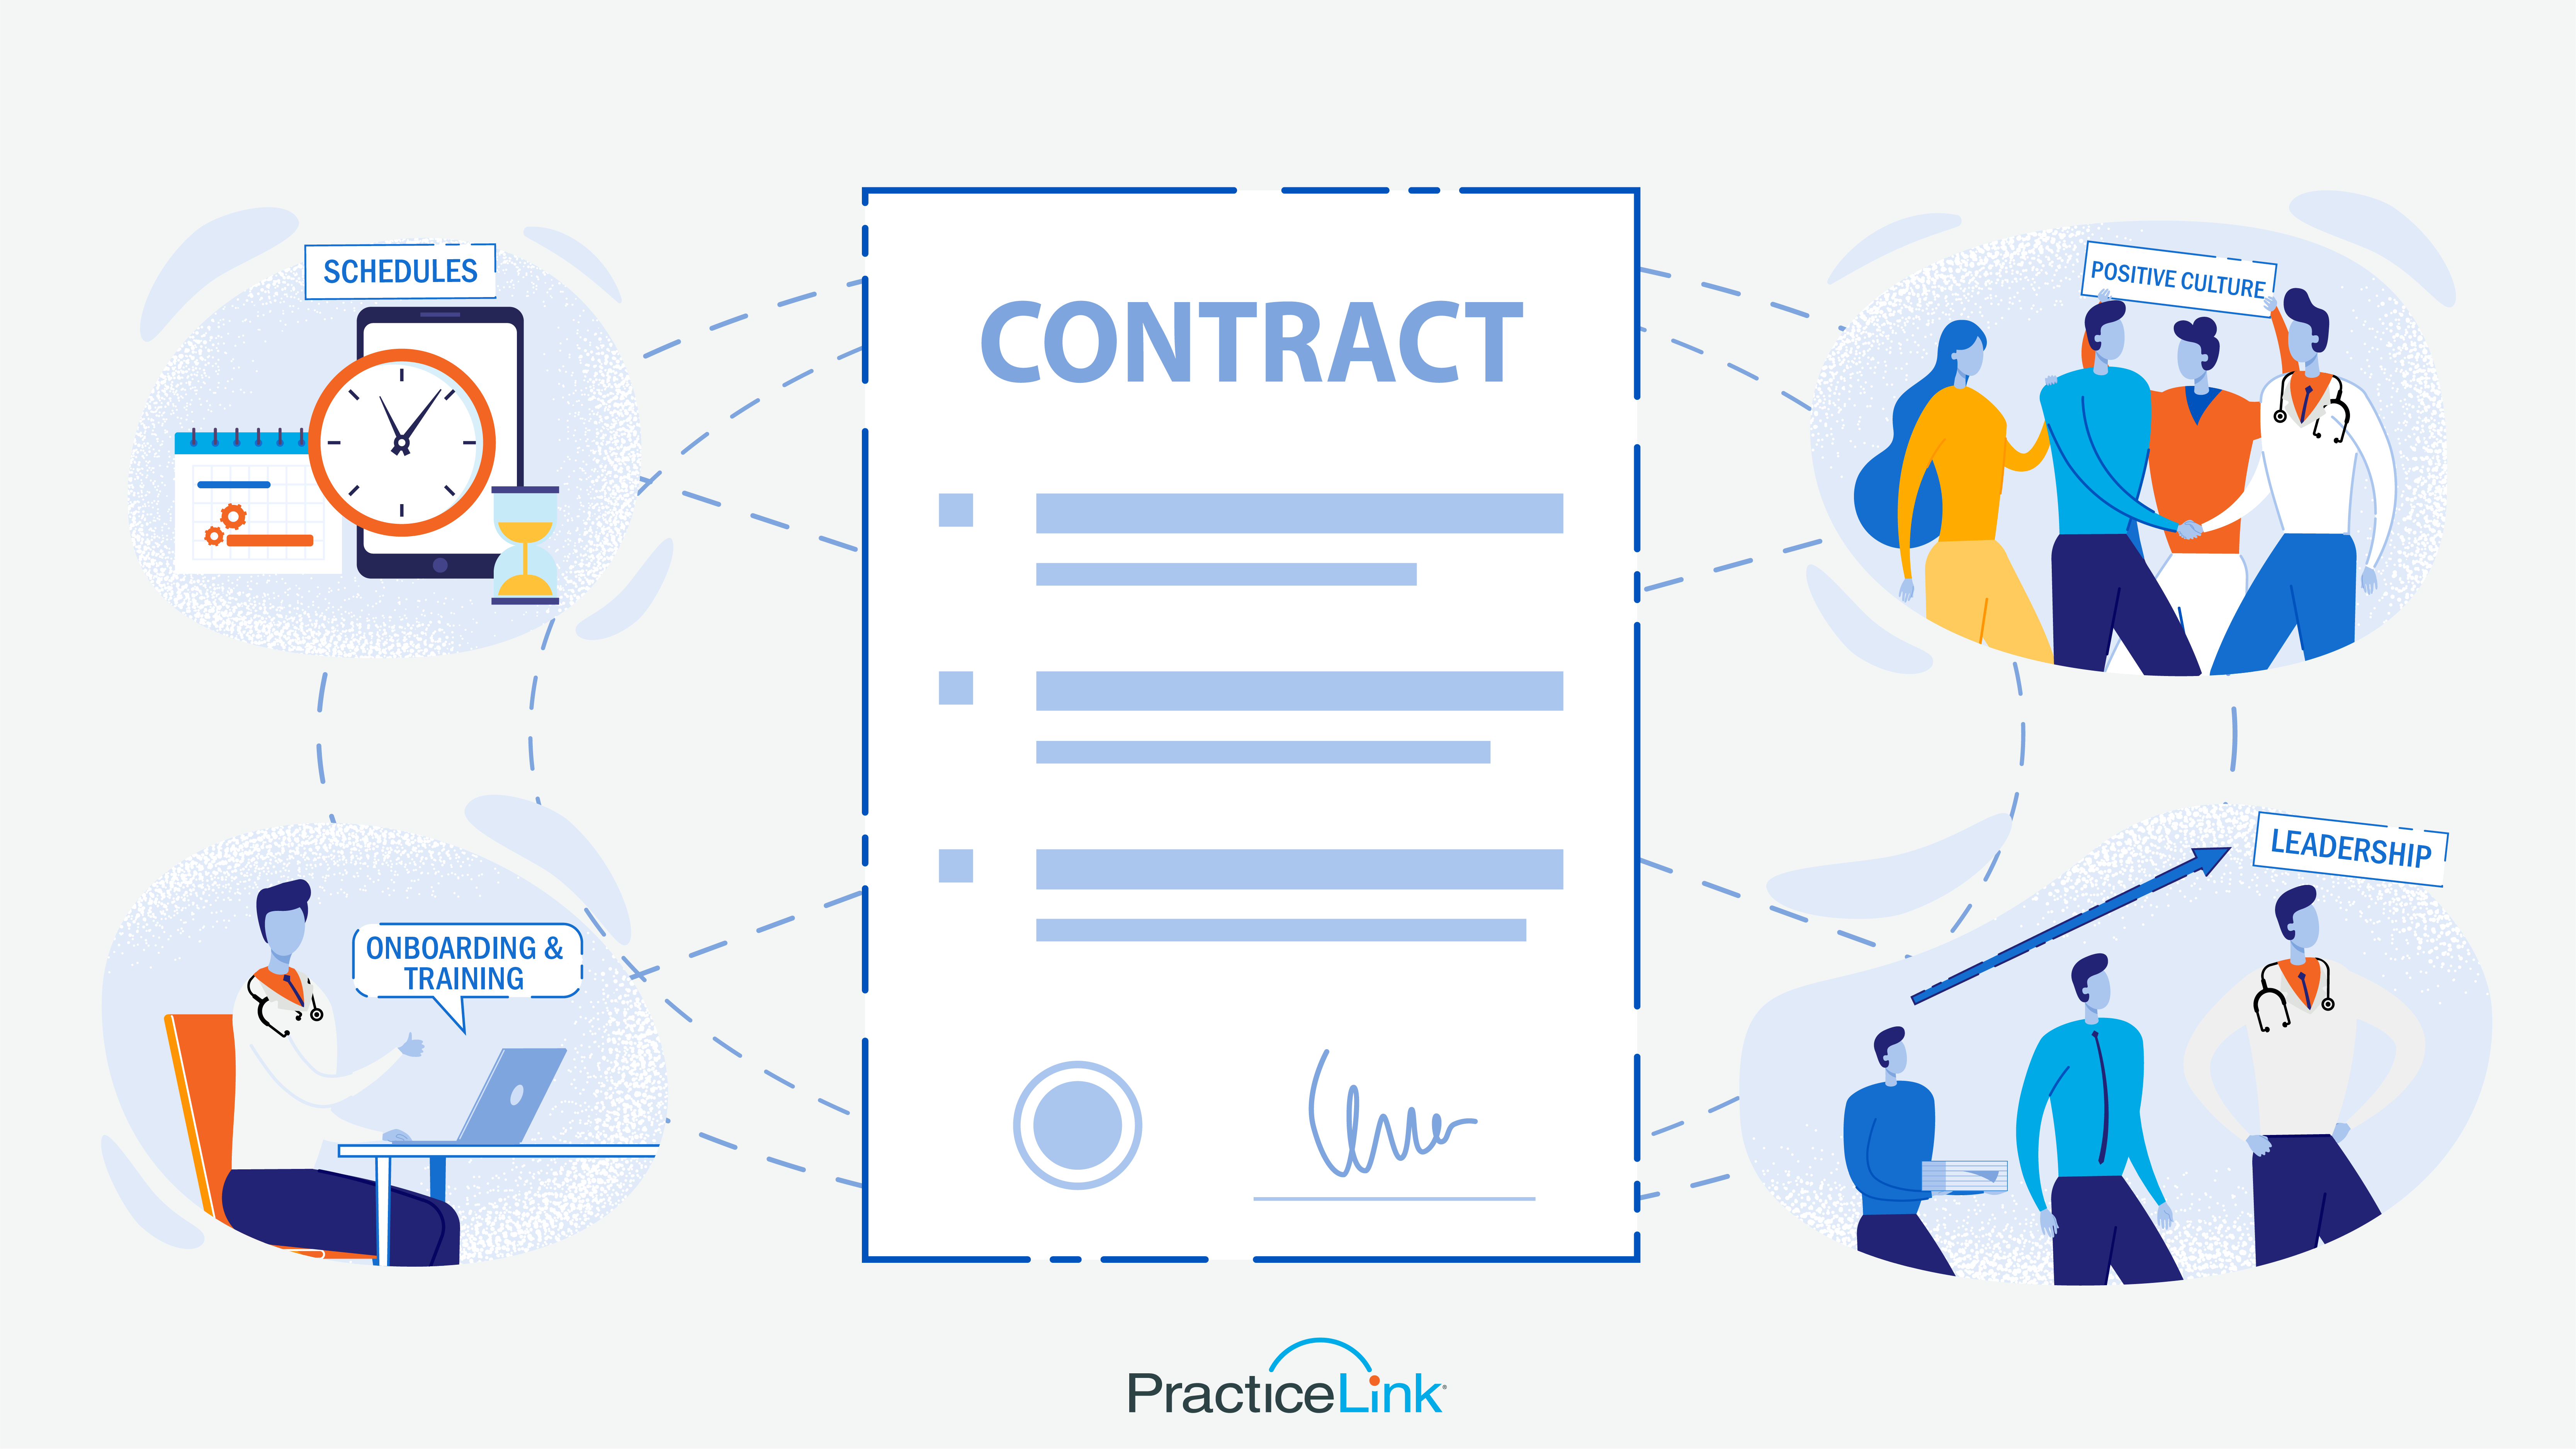 You can start retaining your hires as soon as they sign their contract.